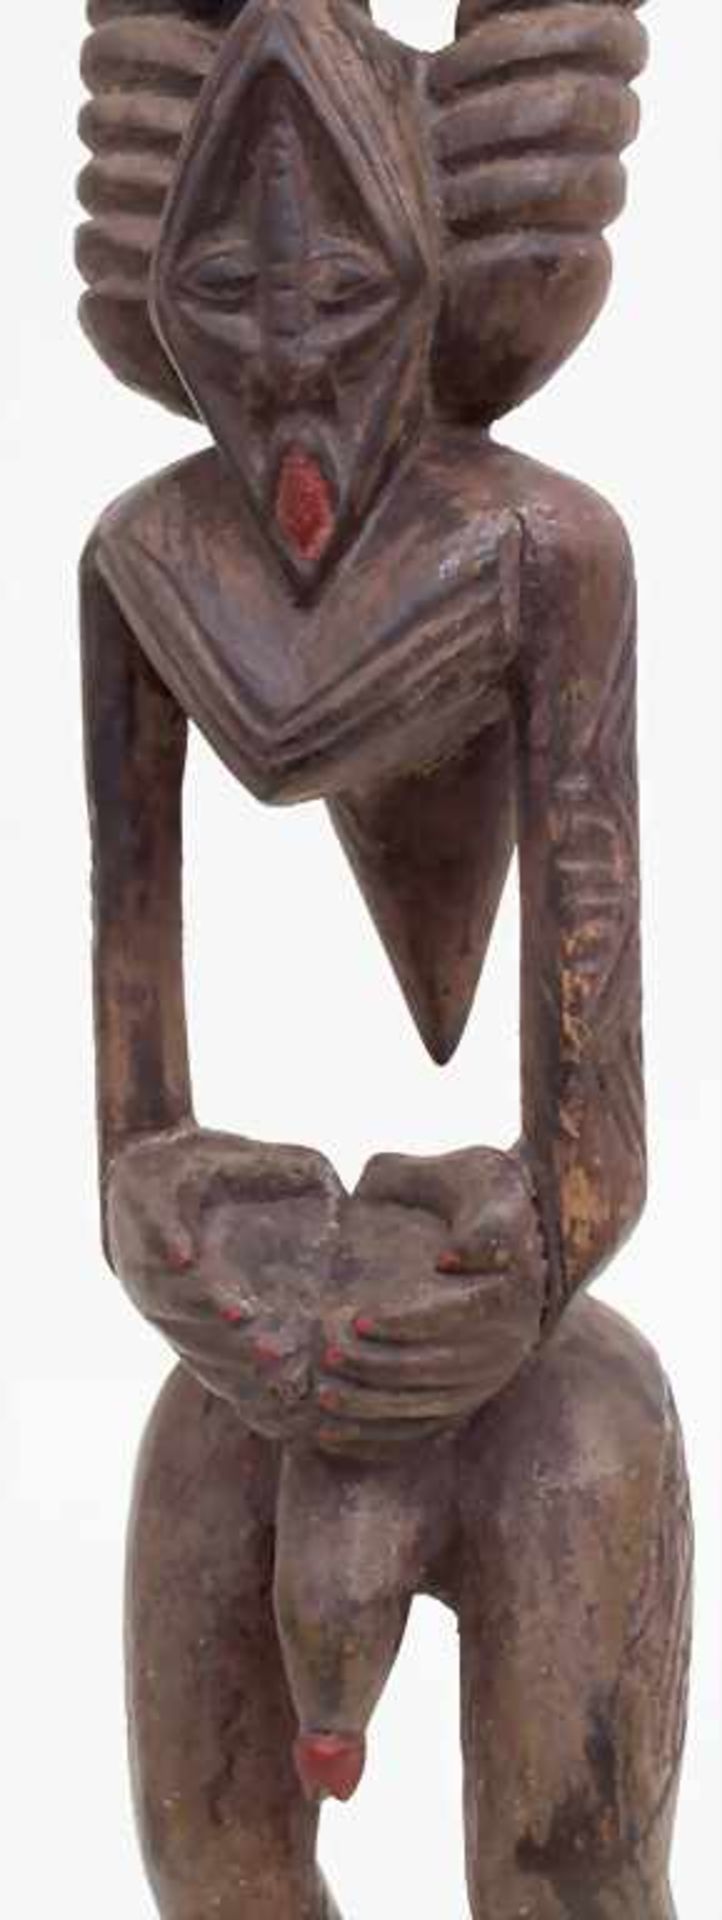 Männliche Figur / A male figure, Igala, NigeriaMaterial: Holz, rotbraune Patina,Höhe: 57 cm, - Image 4 of 4